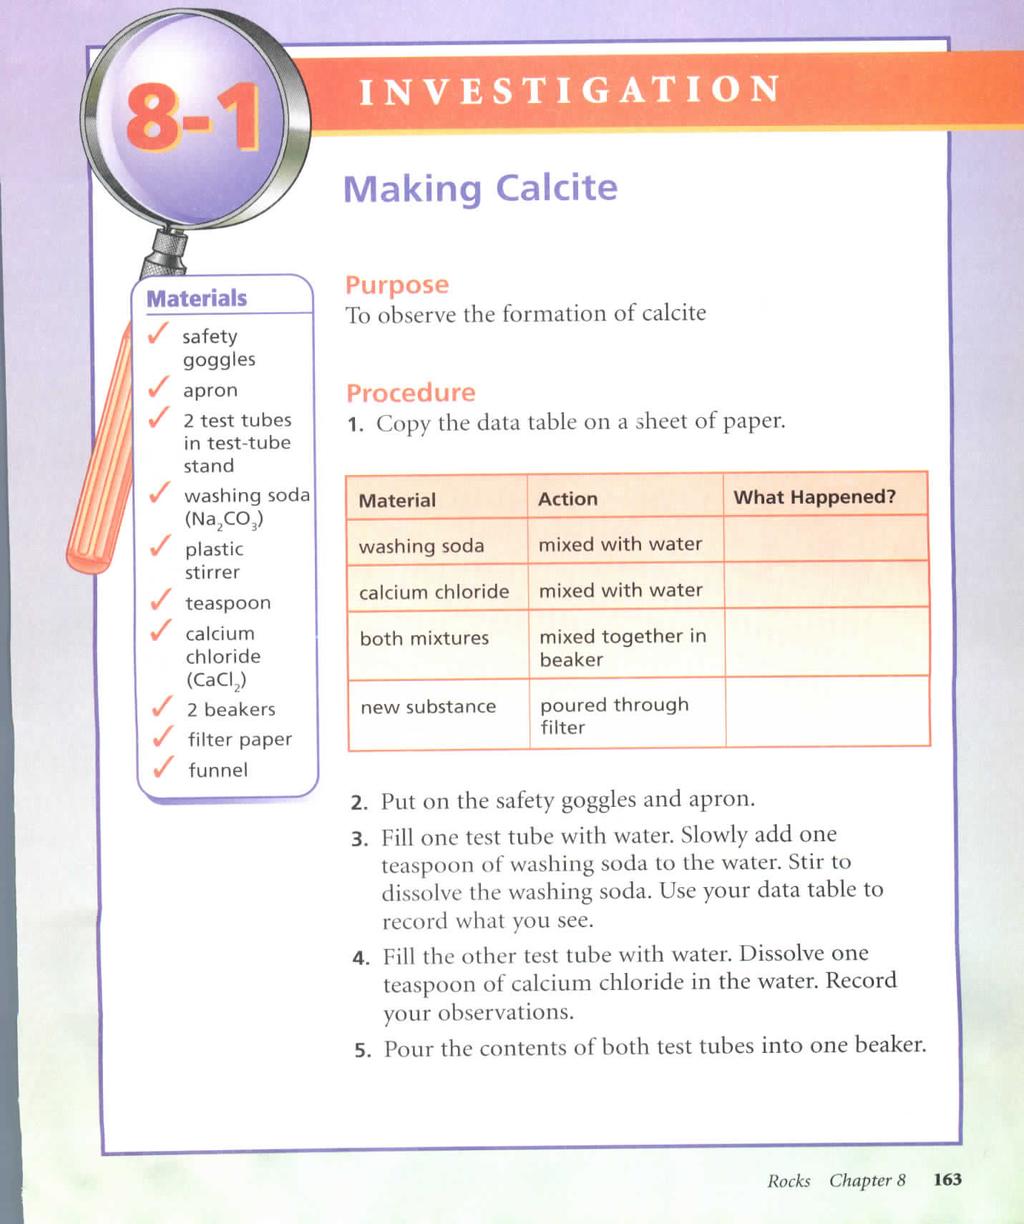 INVESTIGATION Making Calcite Purpose To observe the formation of calcite v apron 2 test tubes in test-tube stand washing soda Procedure 1. Copy the data table on a sheet of paper.